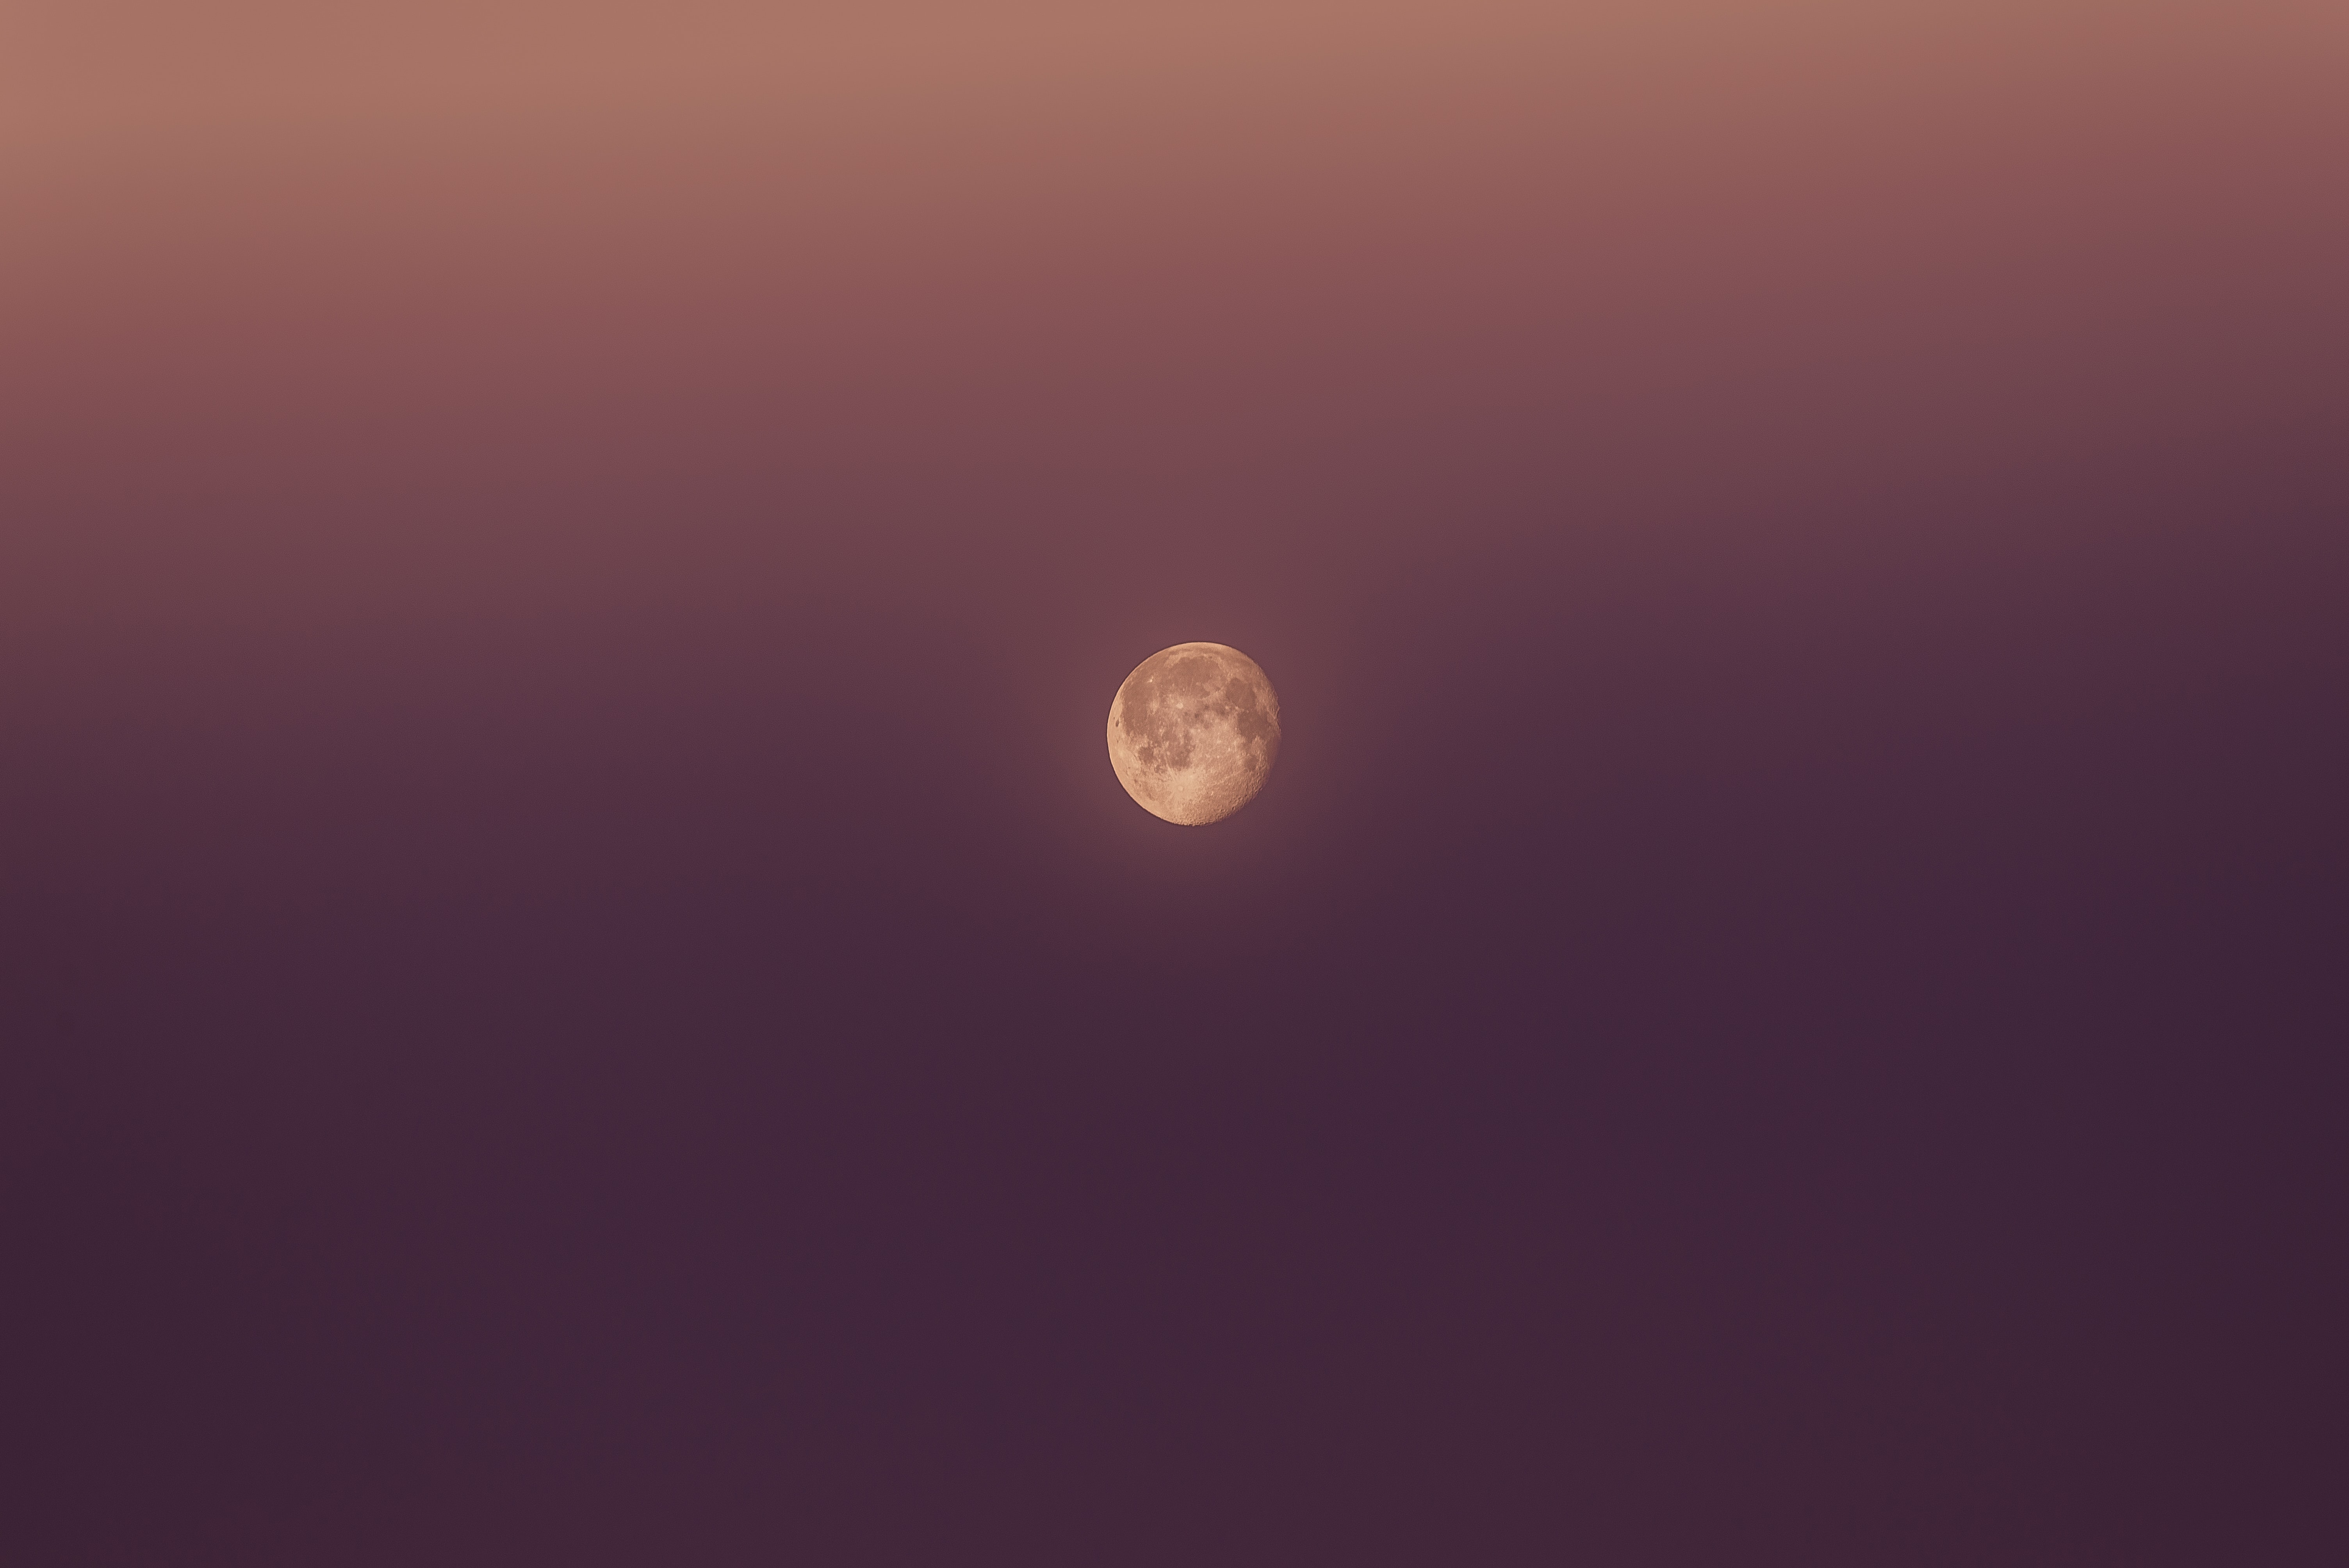 102675 free wallpaper 720x1280 for phone, download images moon, full moon, sky, minimalism 720x1280 for mobile